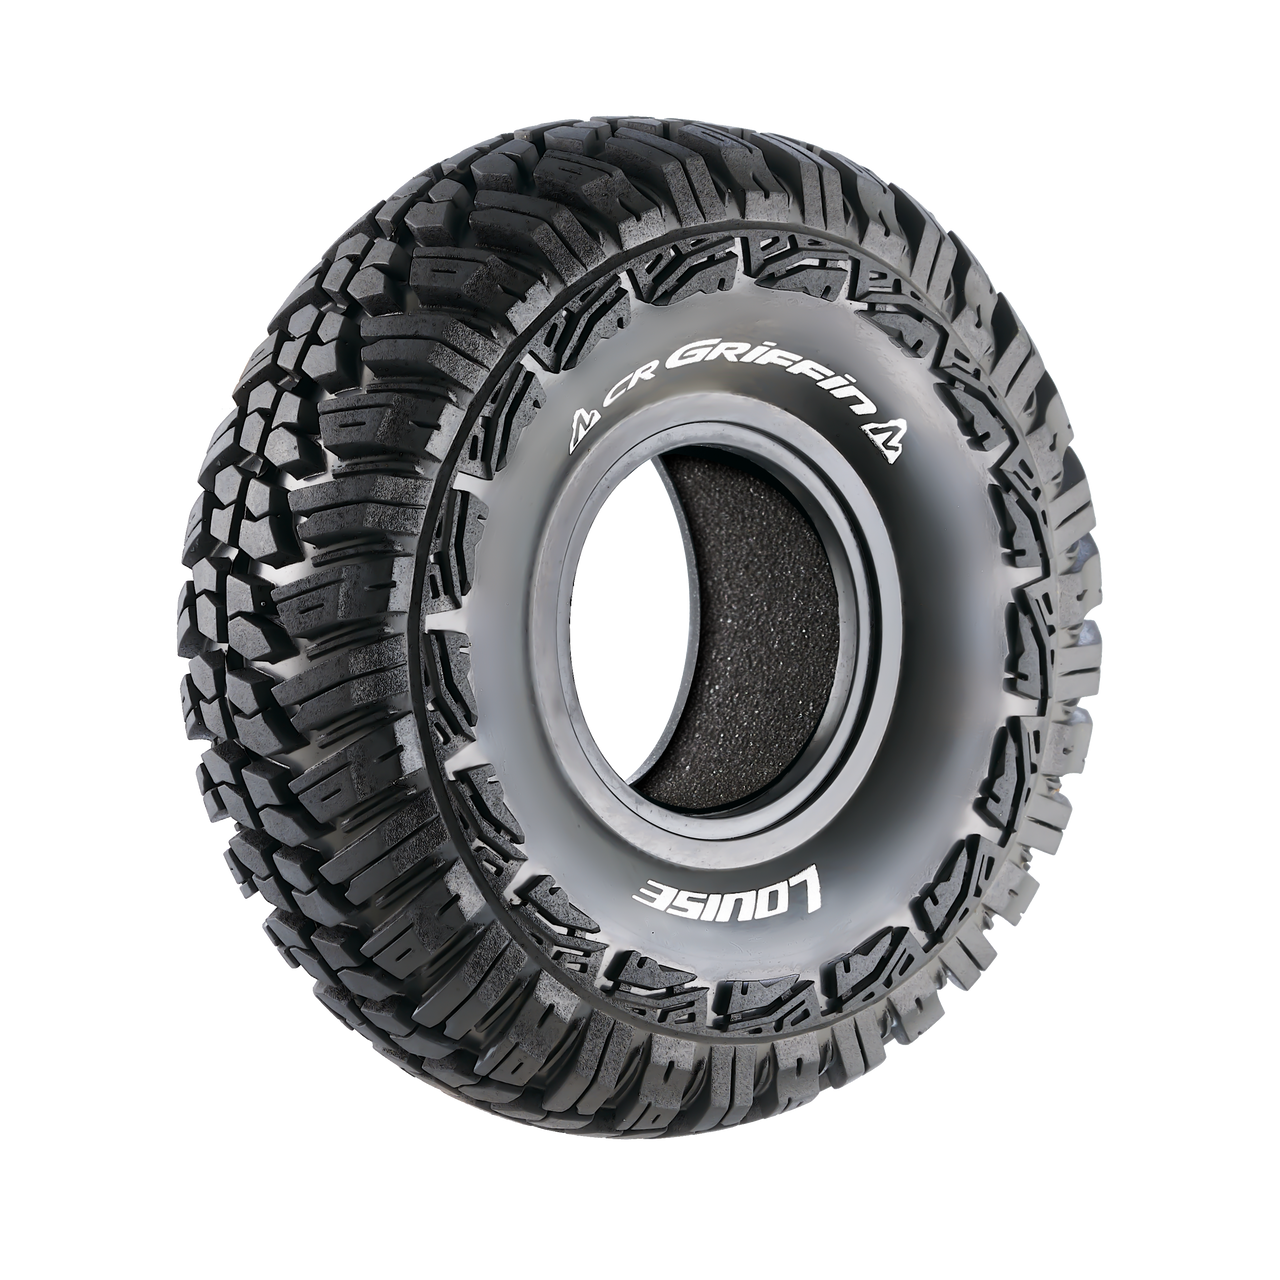 L-T3235VI Louise CR-Griffin 2.2 Crawler Tires with Insert (2)